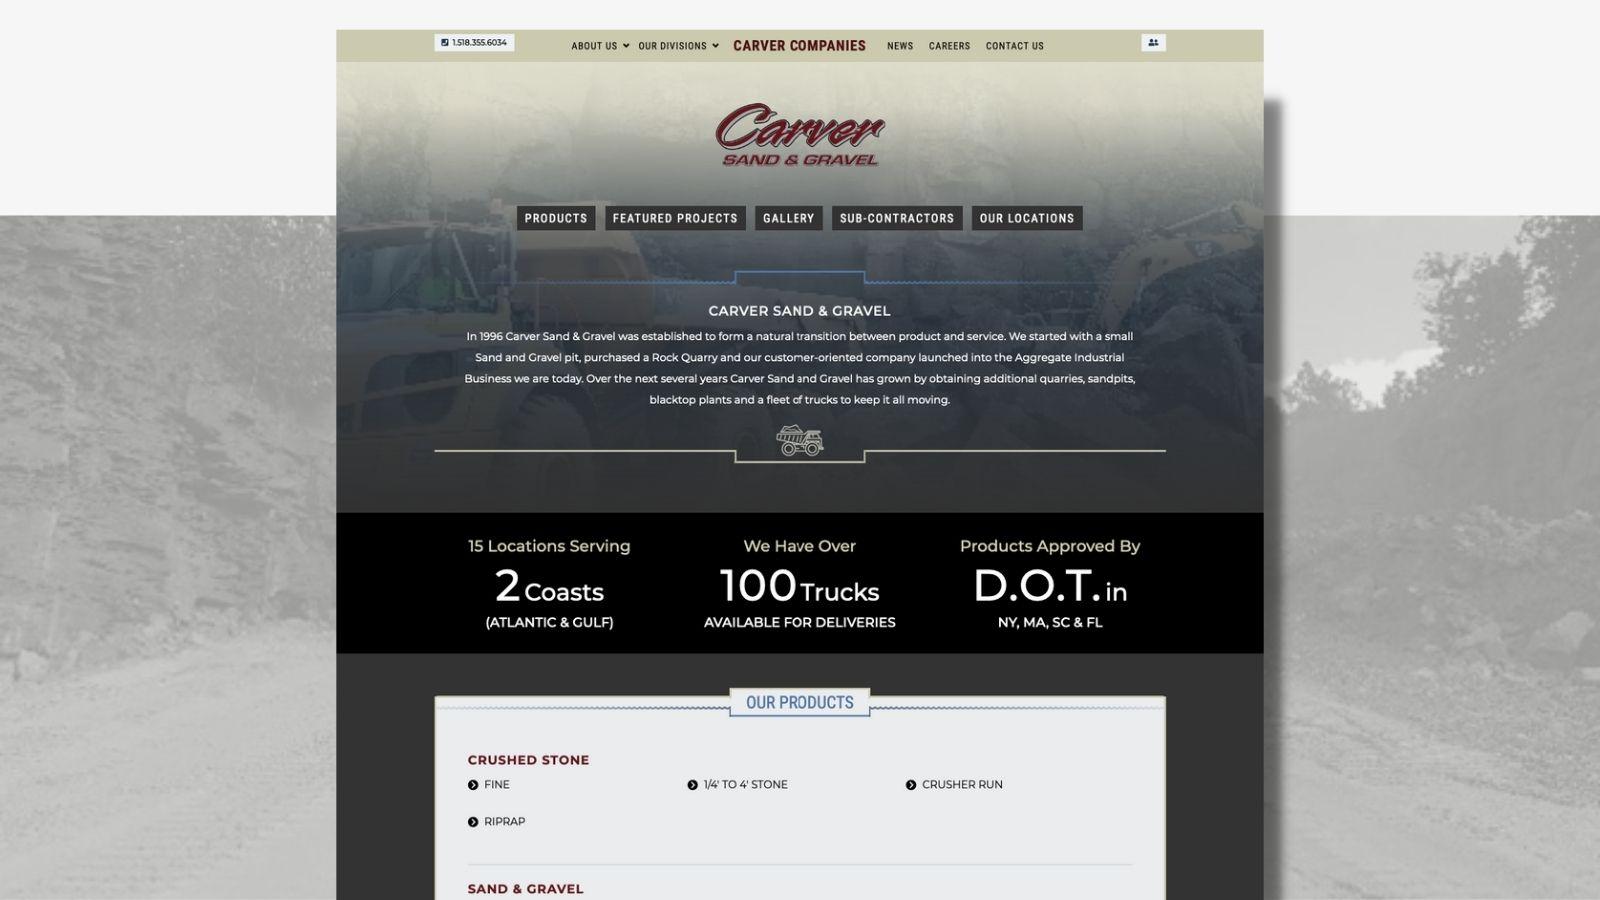 Carver Companies | Carver land-based business page